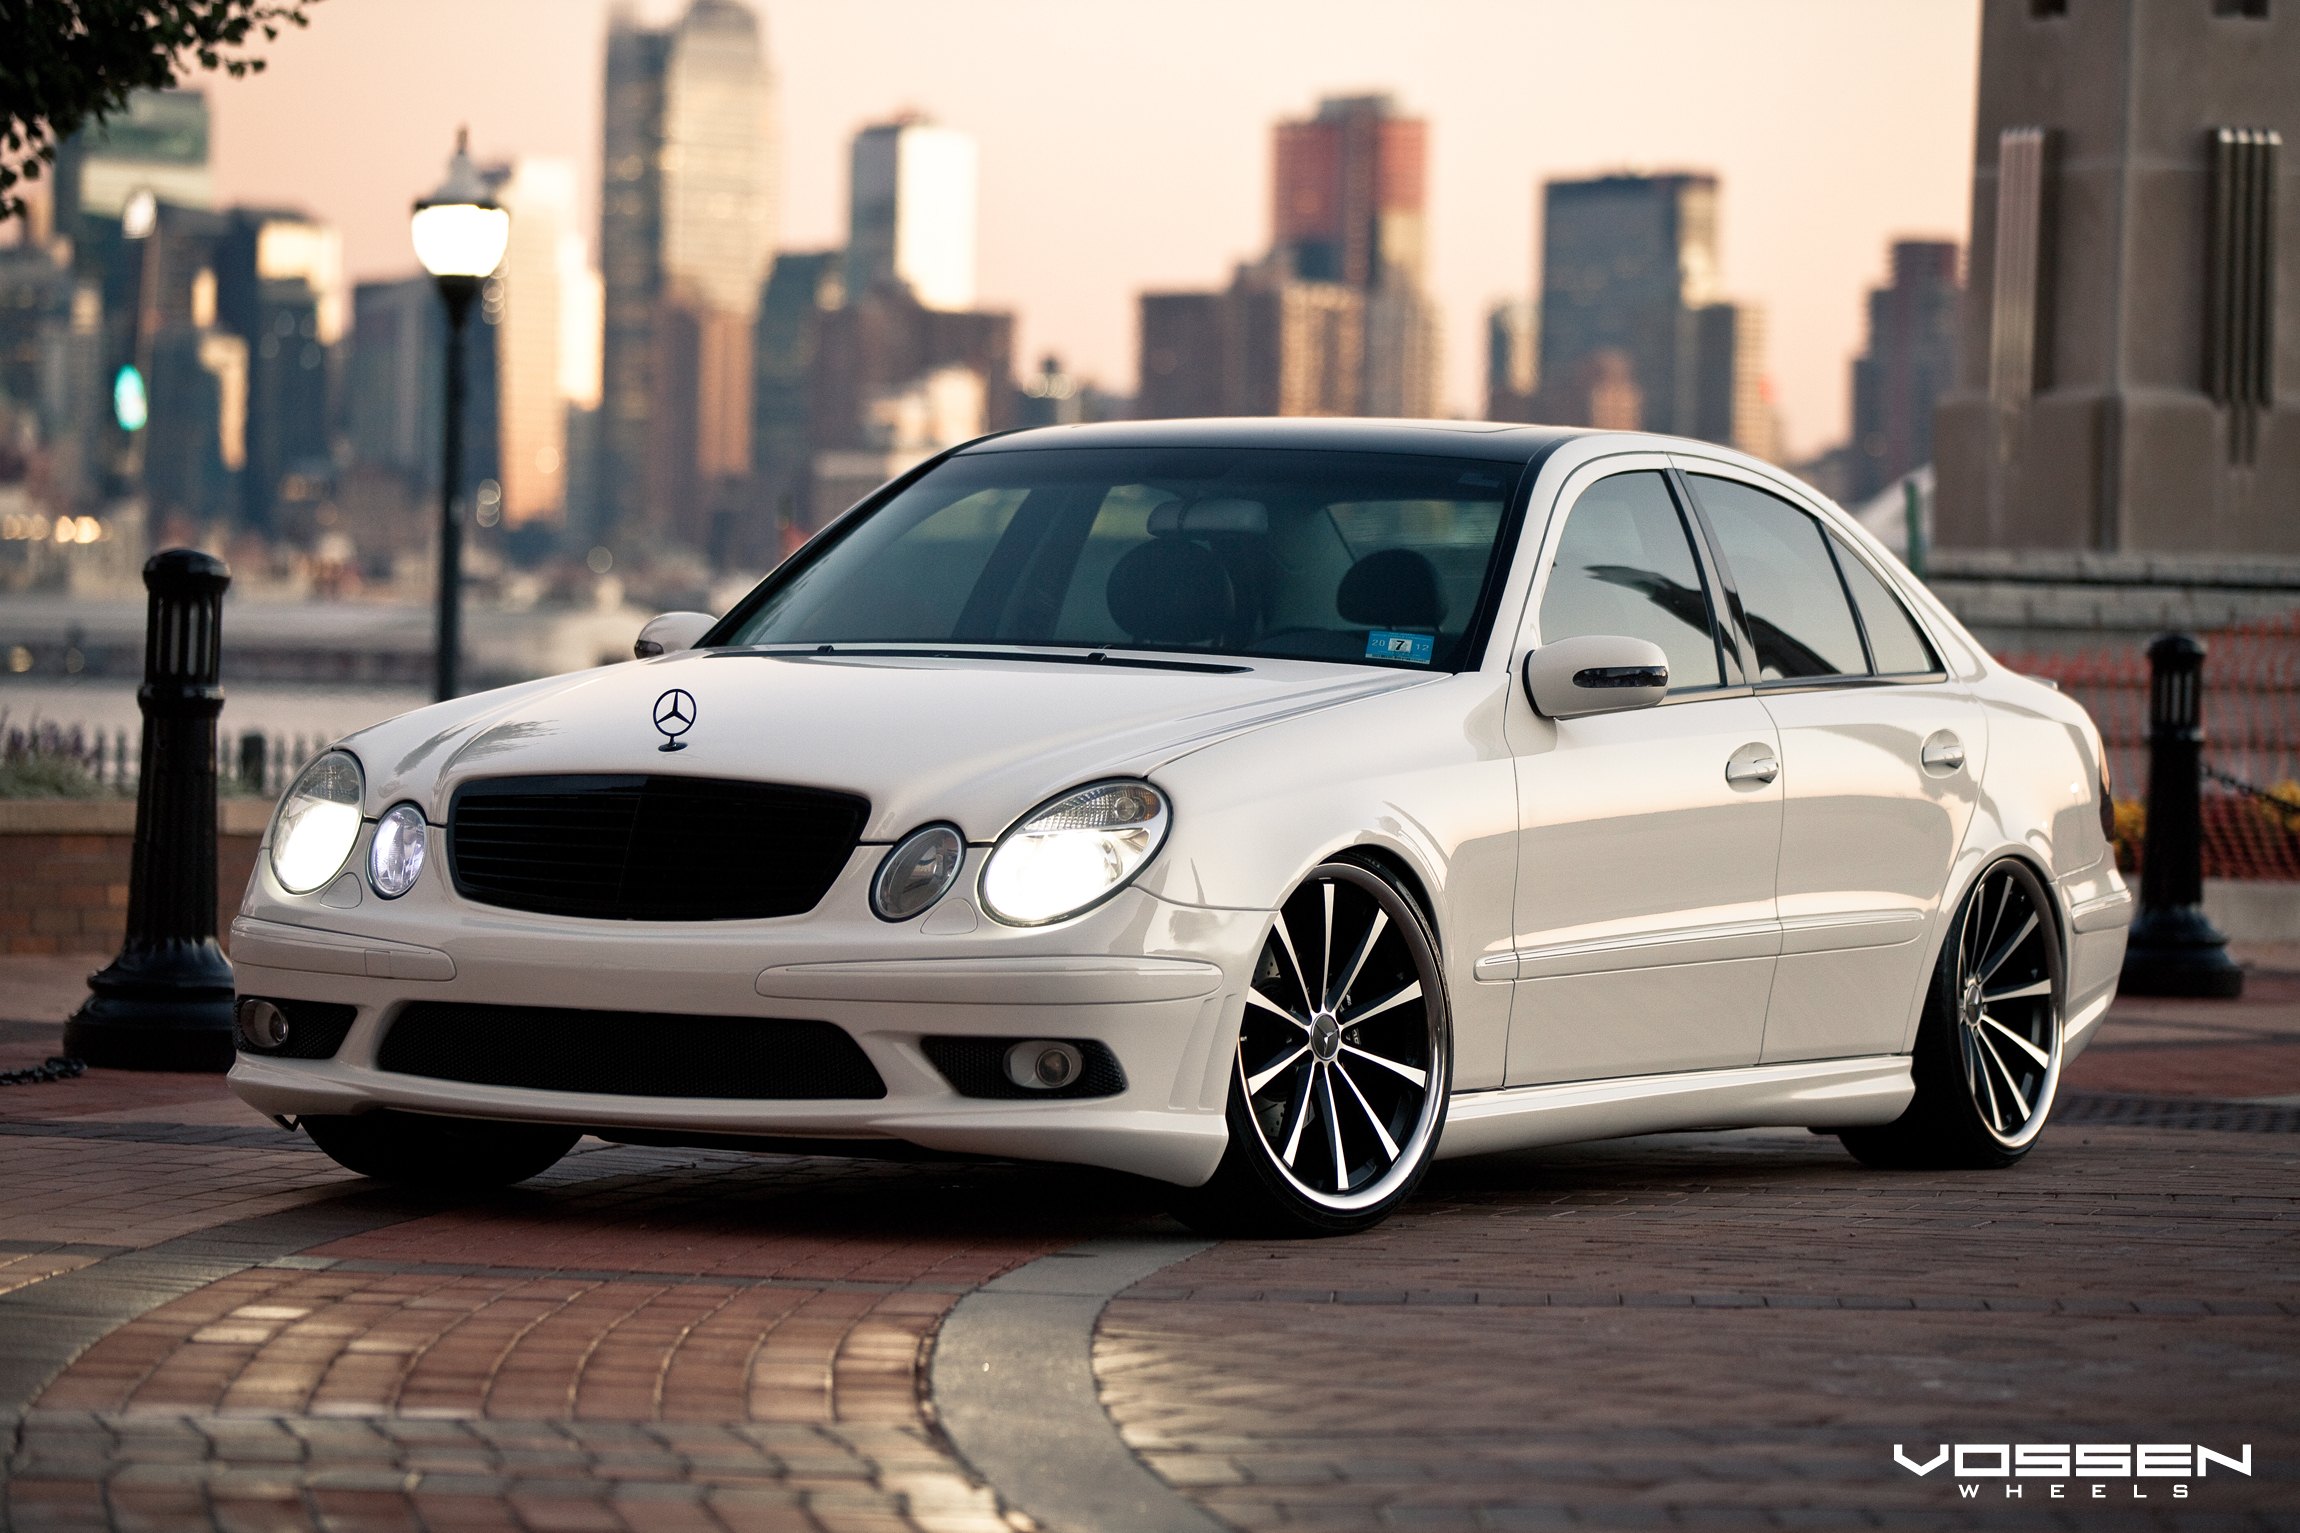 Aftermarket Front Bumper on White Mercedes E Class - Photo by Vossen